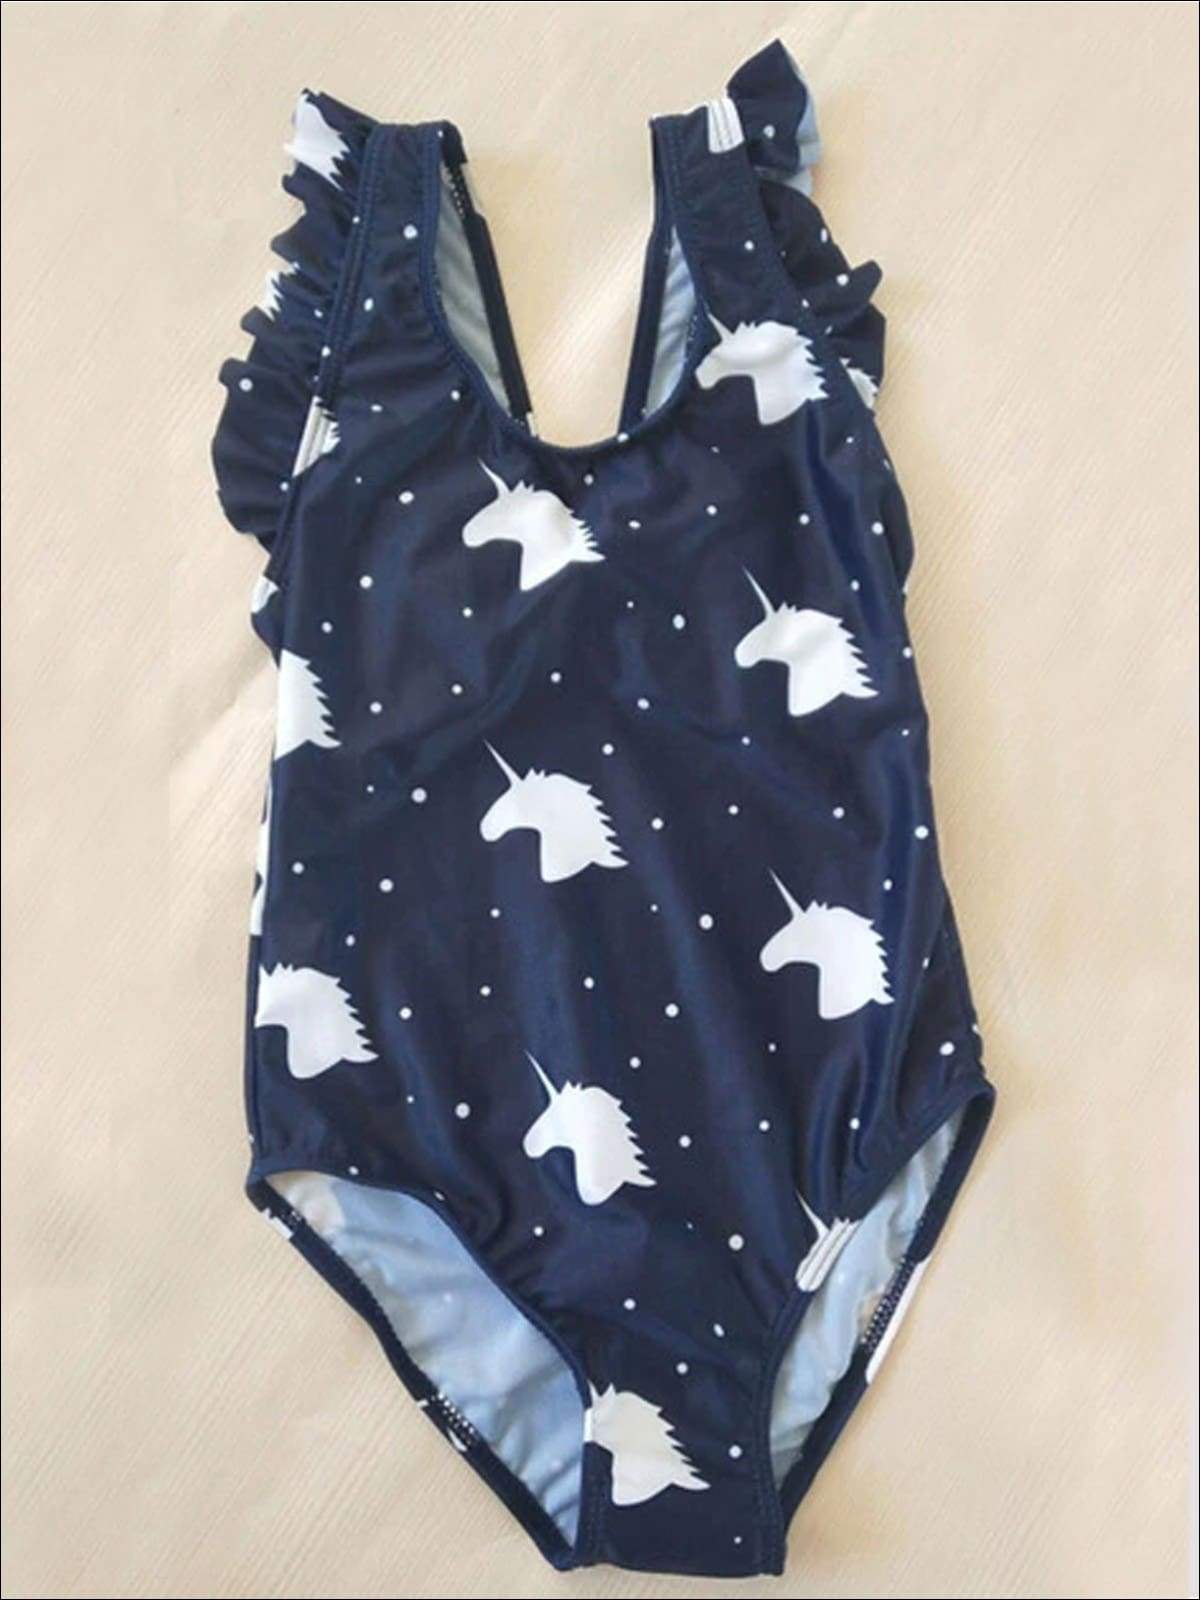 Mommy & Me Dotted Unicorn Print One Piece Swimsuit - Kid Blue / 12M - Girls One Piece Swimsuit